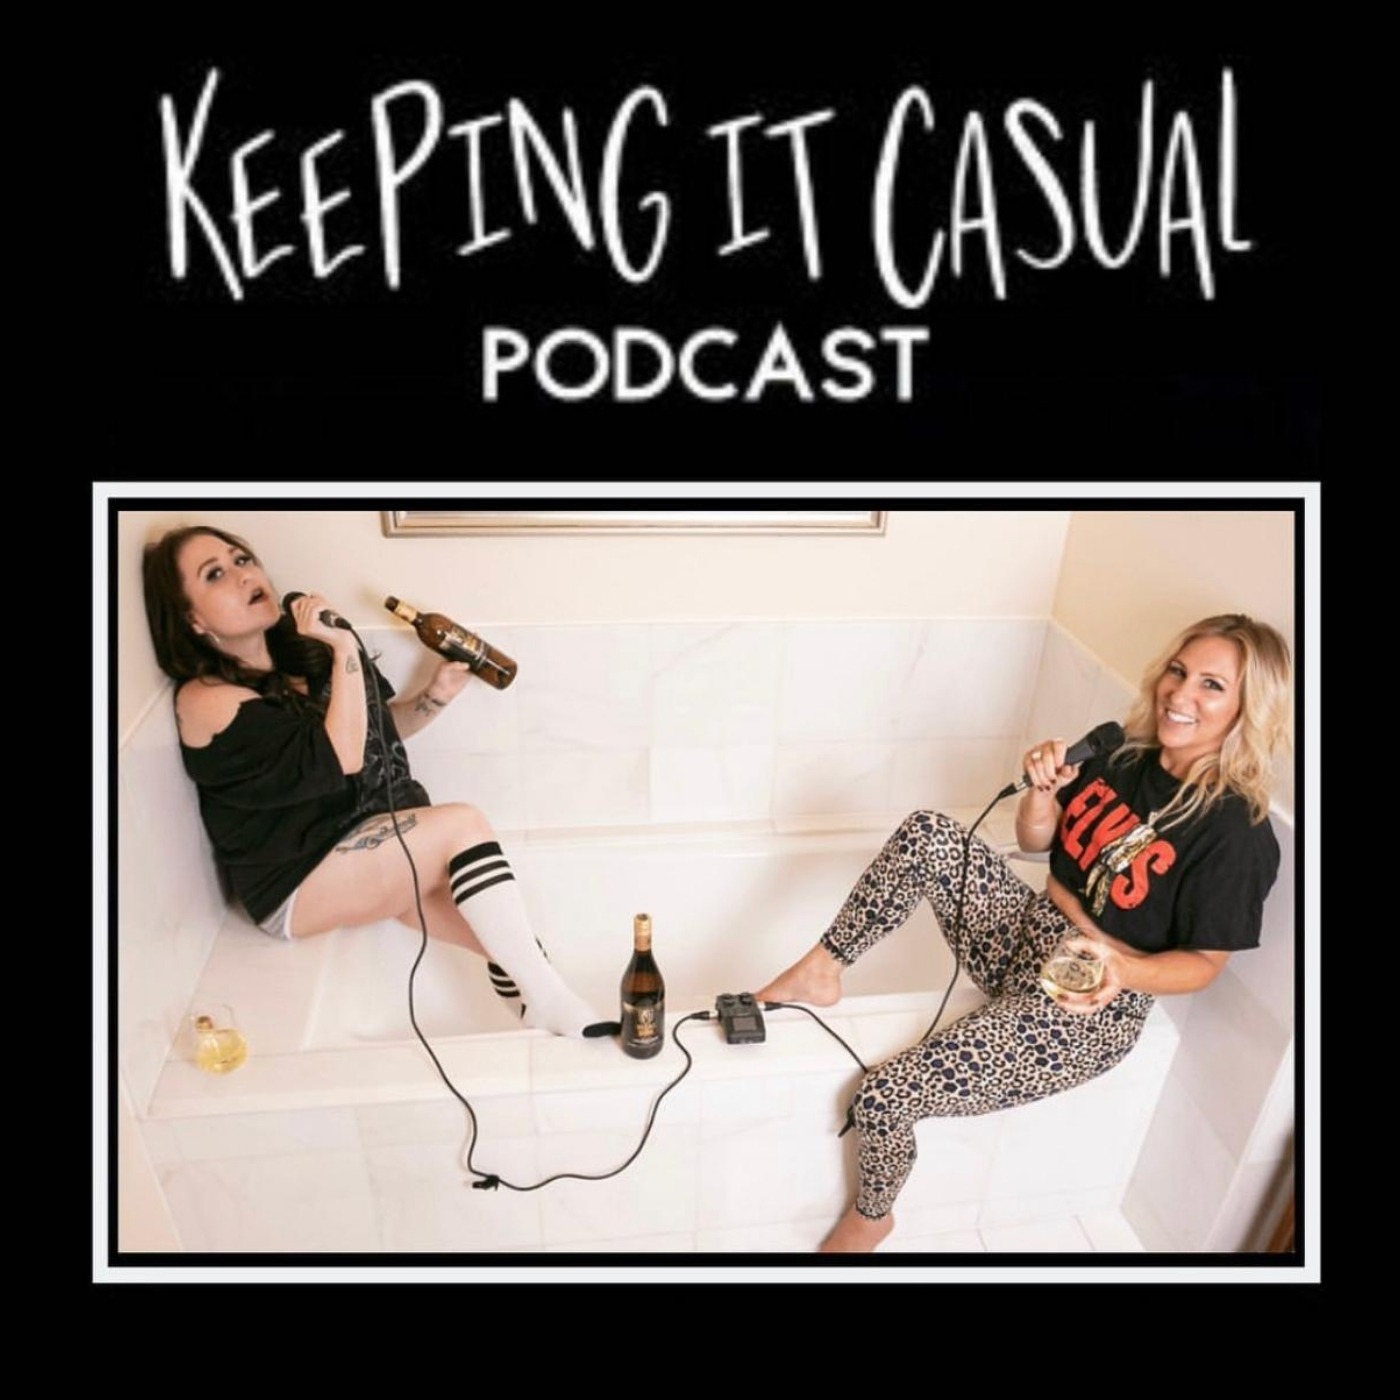 Keeping It Casual Podcast